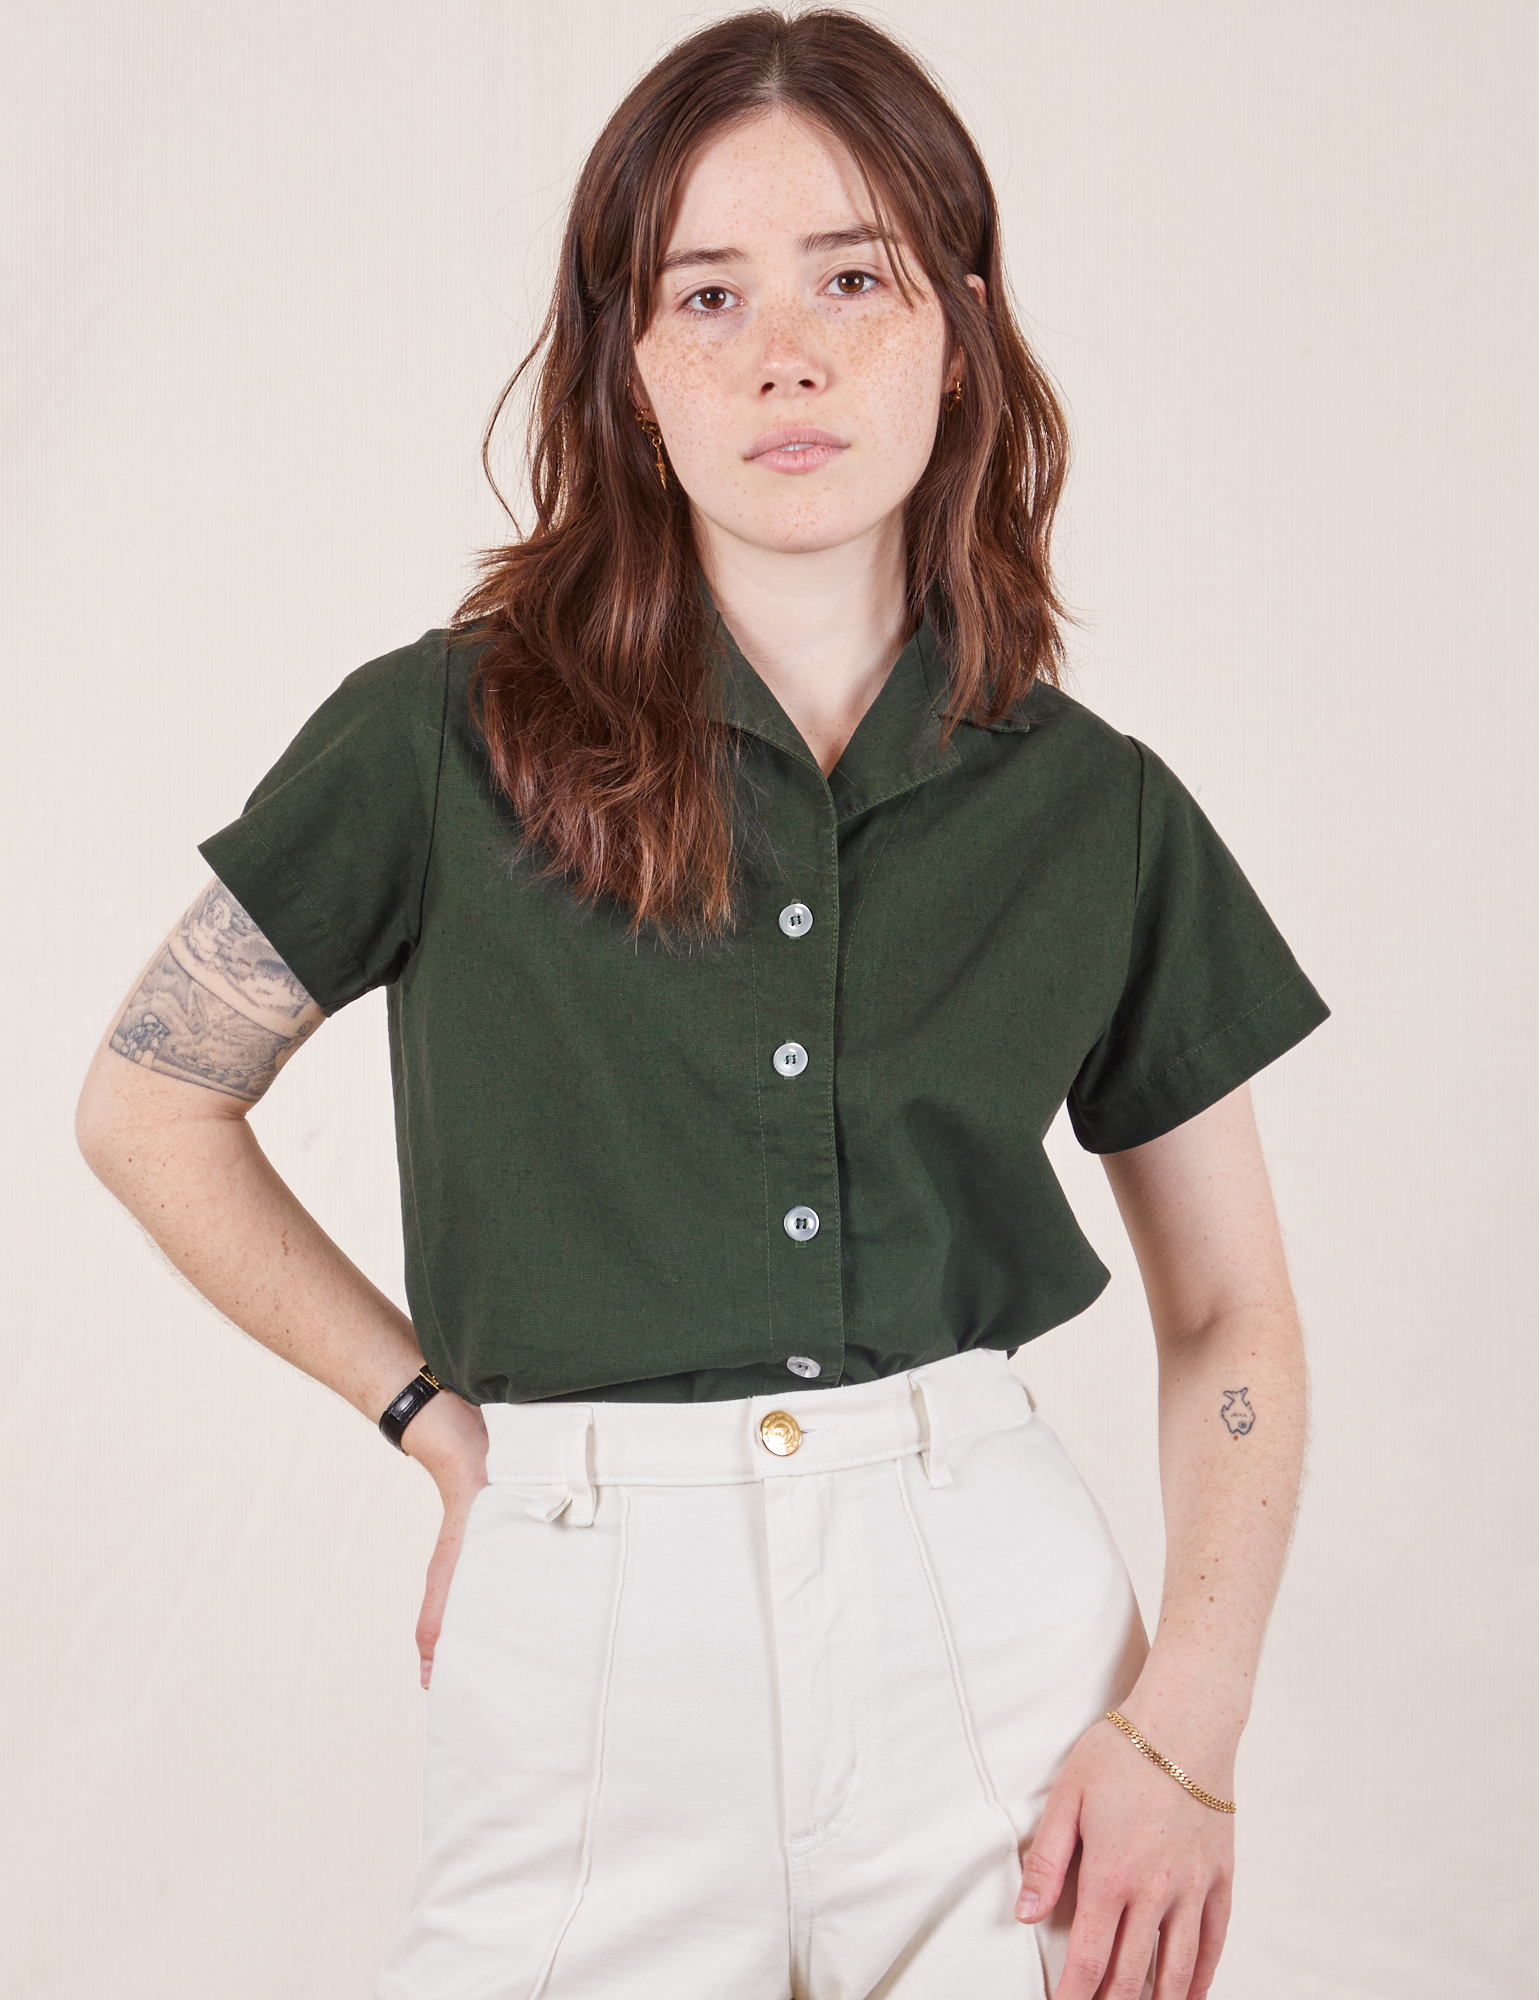 Hana is wearing Pantry Button-Up in Swamp Green tucked into vintage tee off-white Western Pants